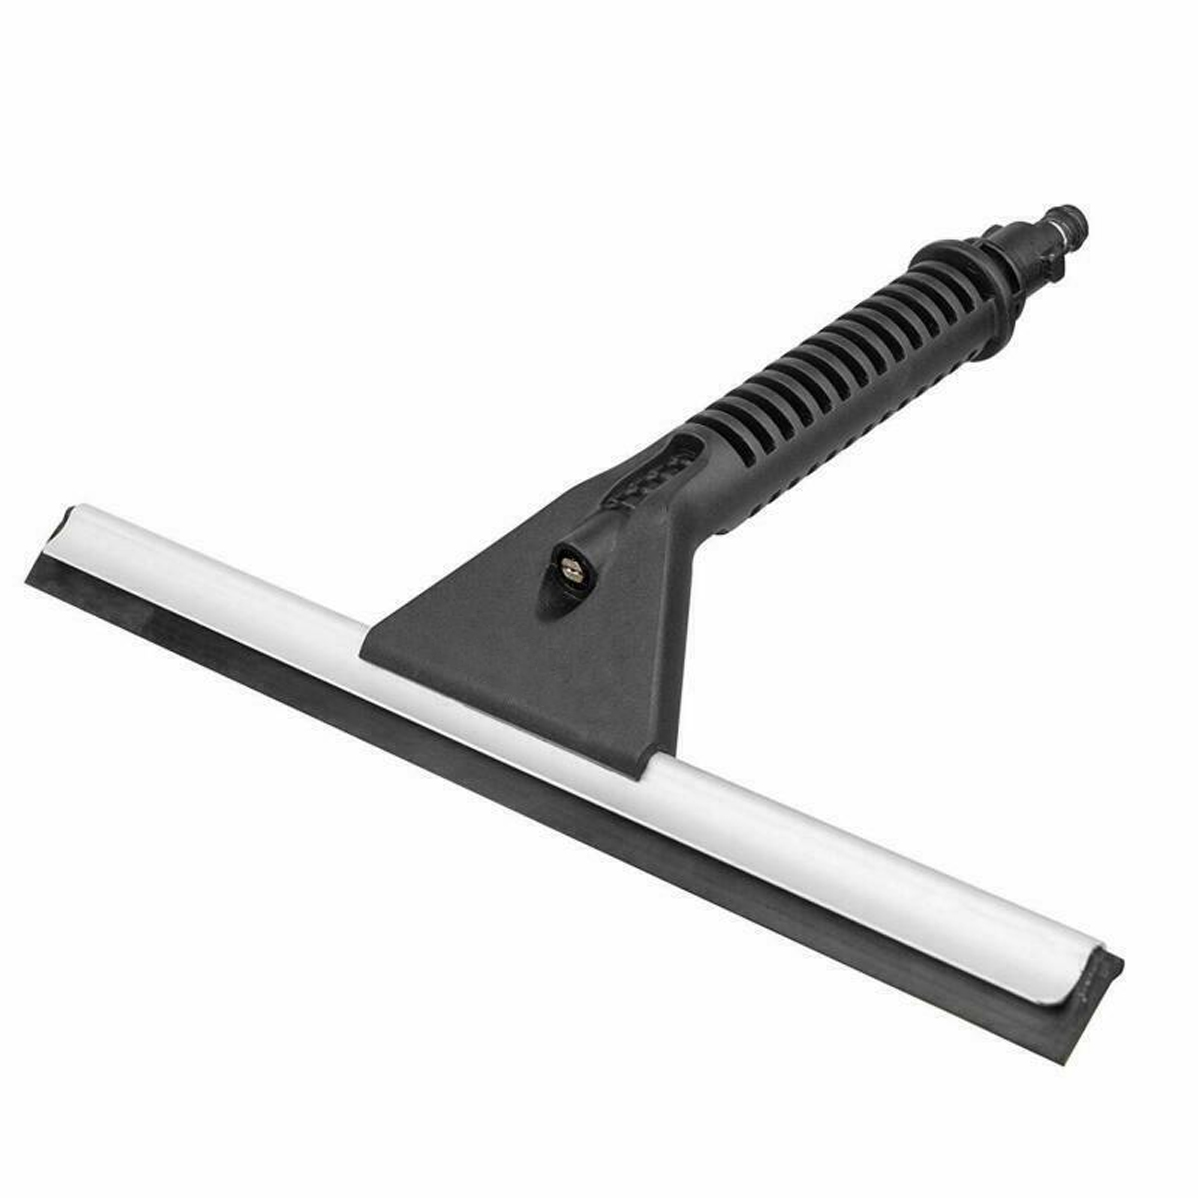 

Black Window Squeegee With Water Sprayer Accessory For WORX WA4050 Car Washer